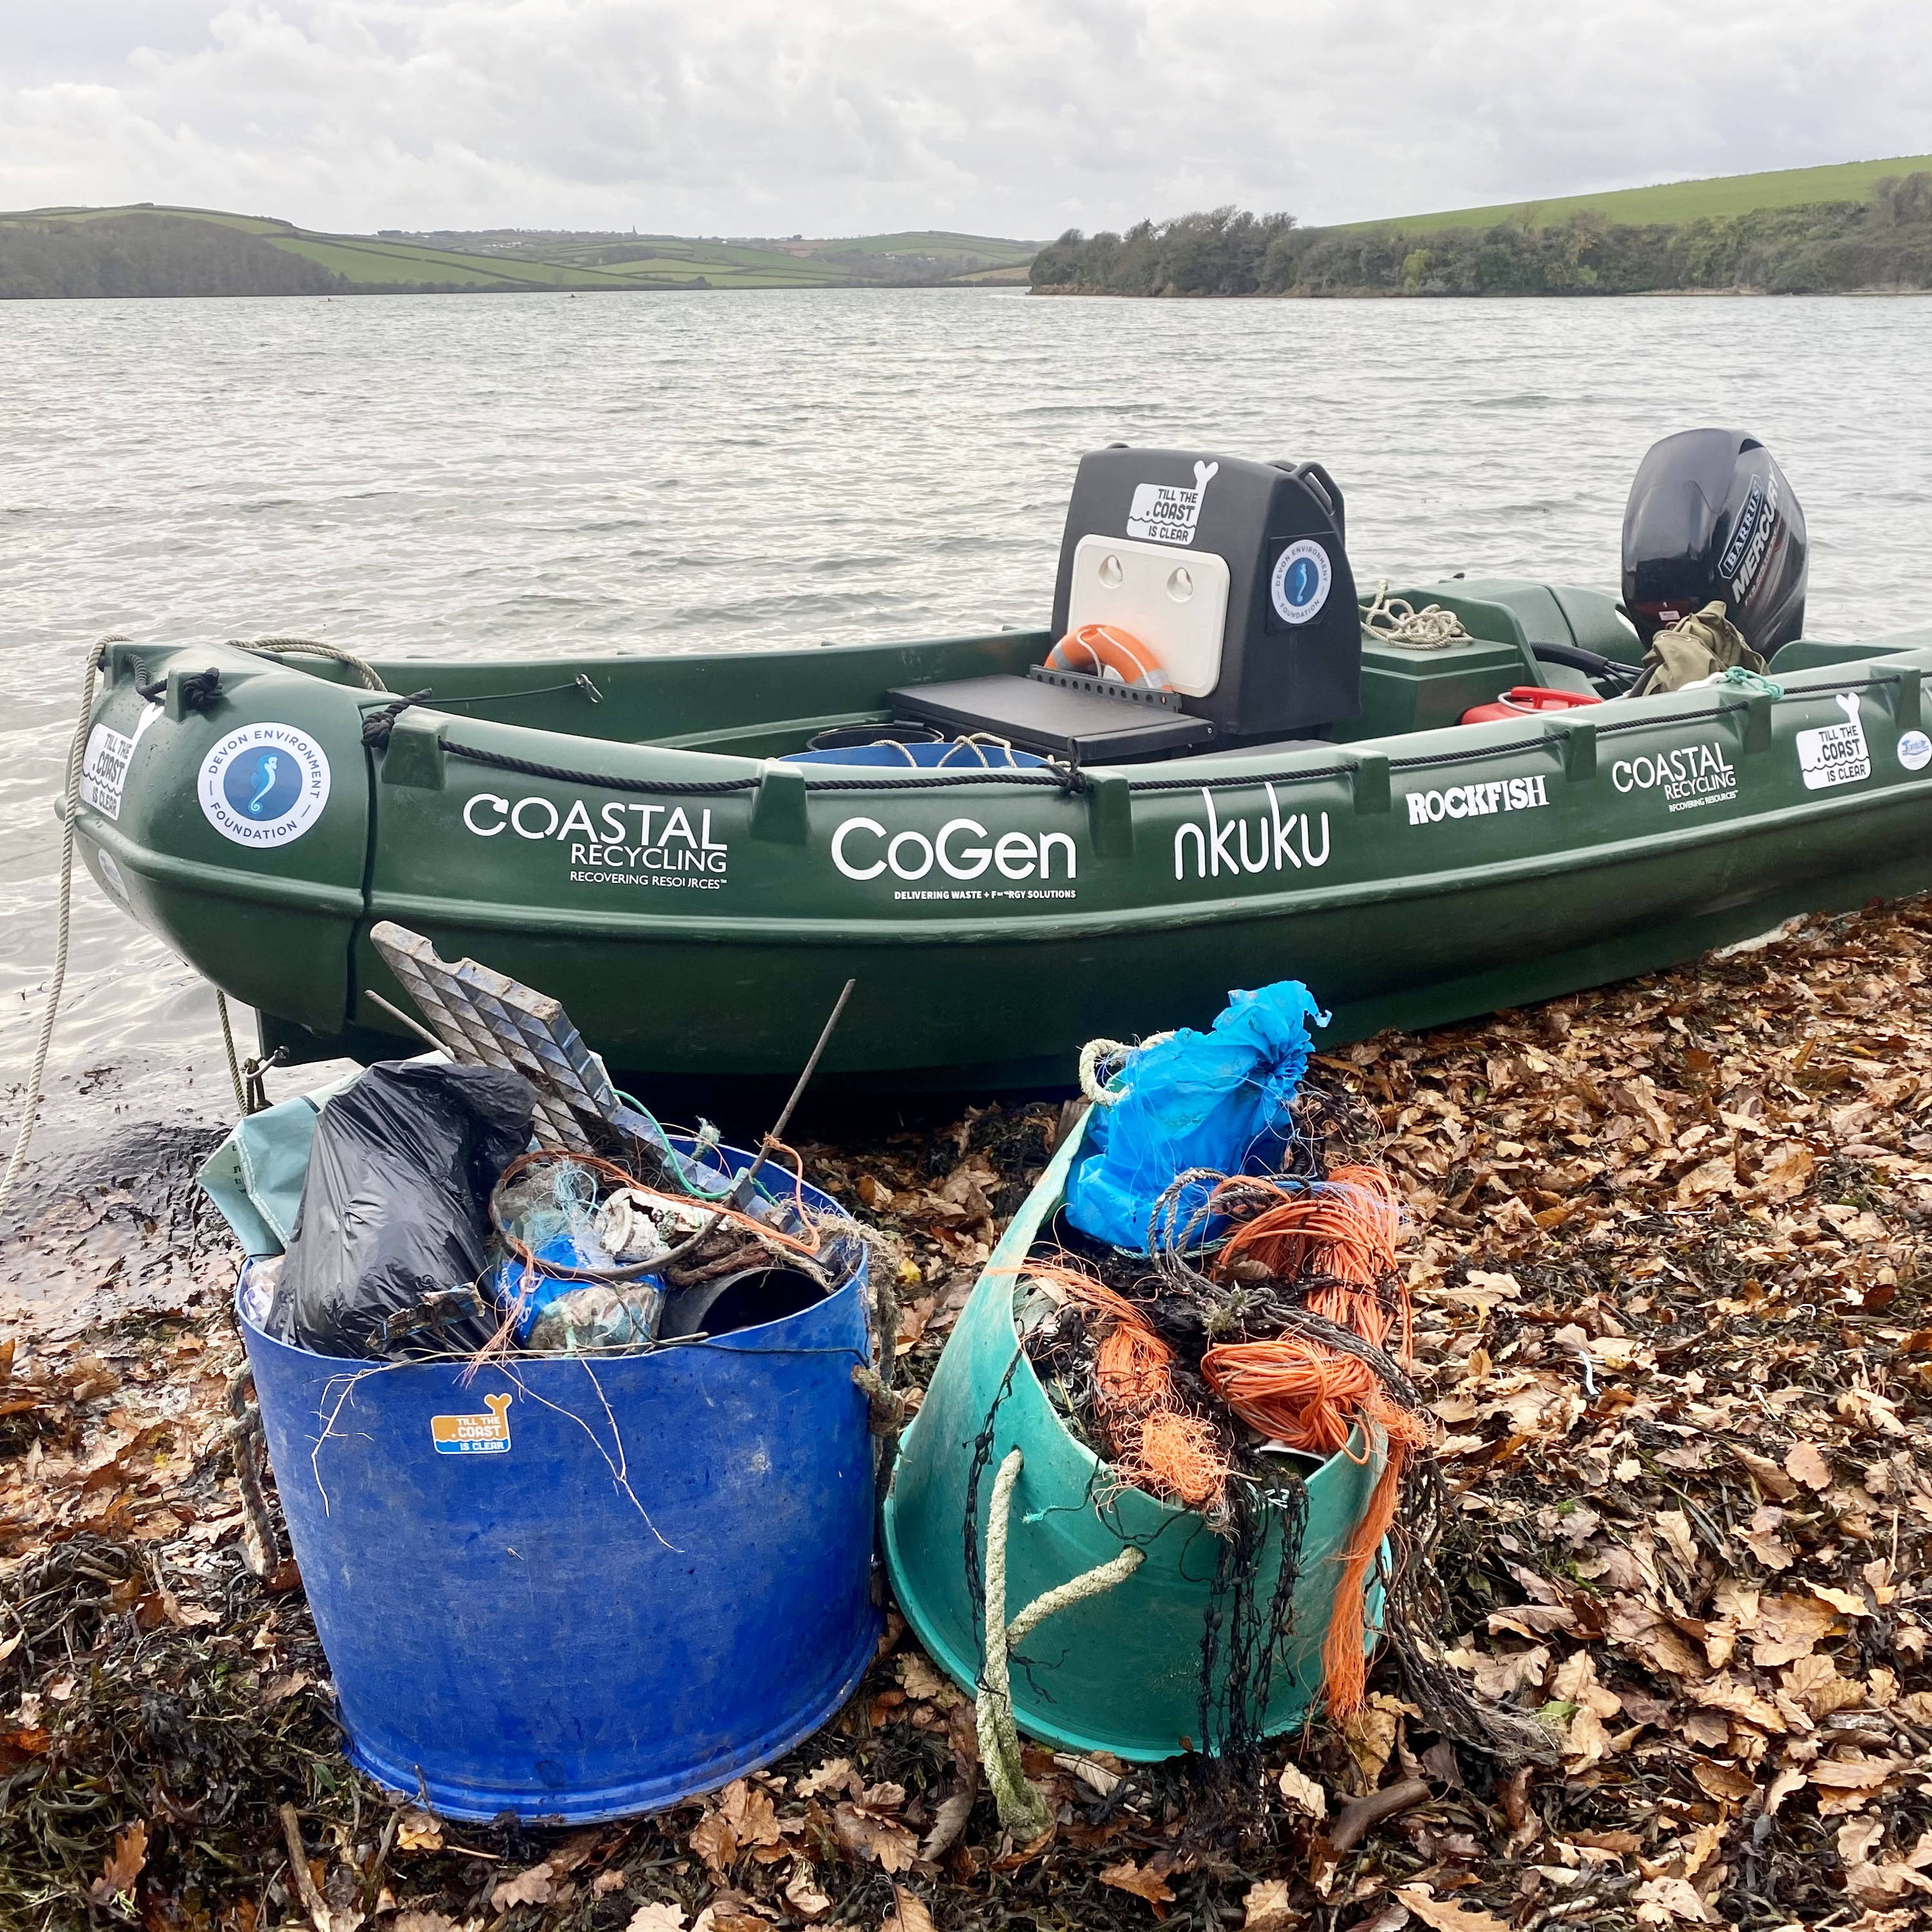 A blue tub collecting using for collecting debris on a beach in the south west.